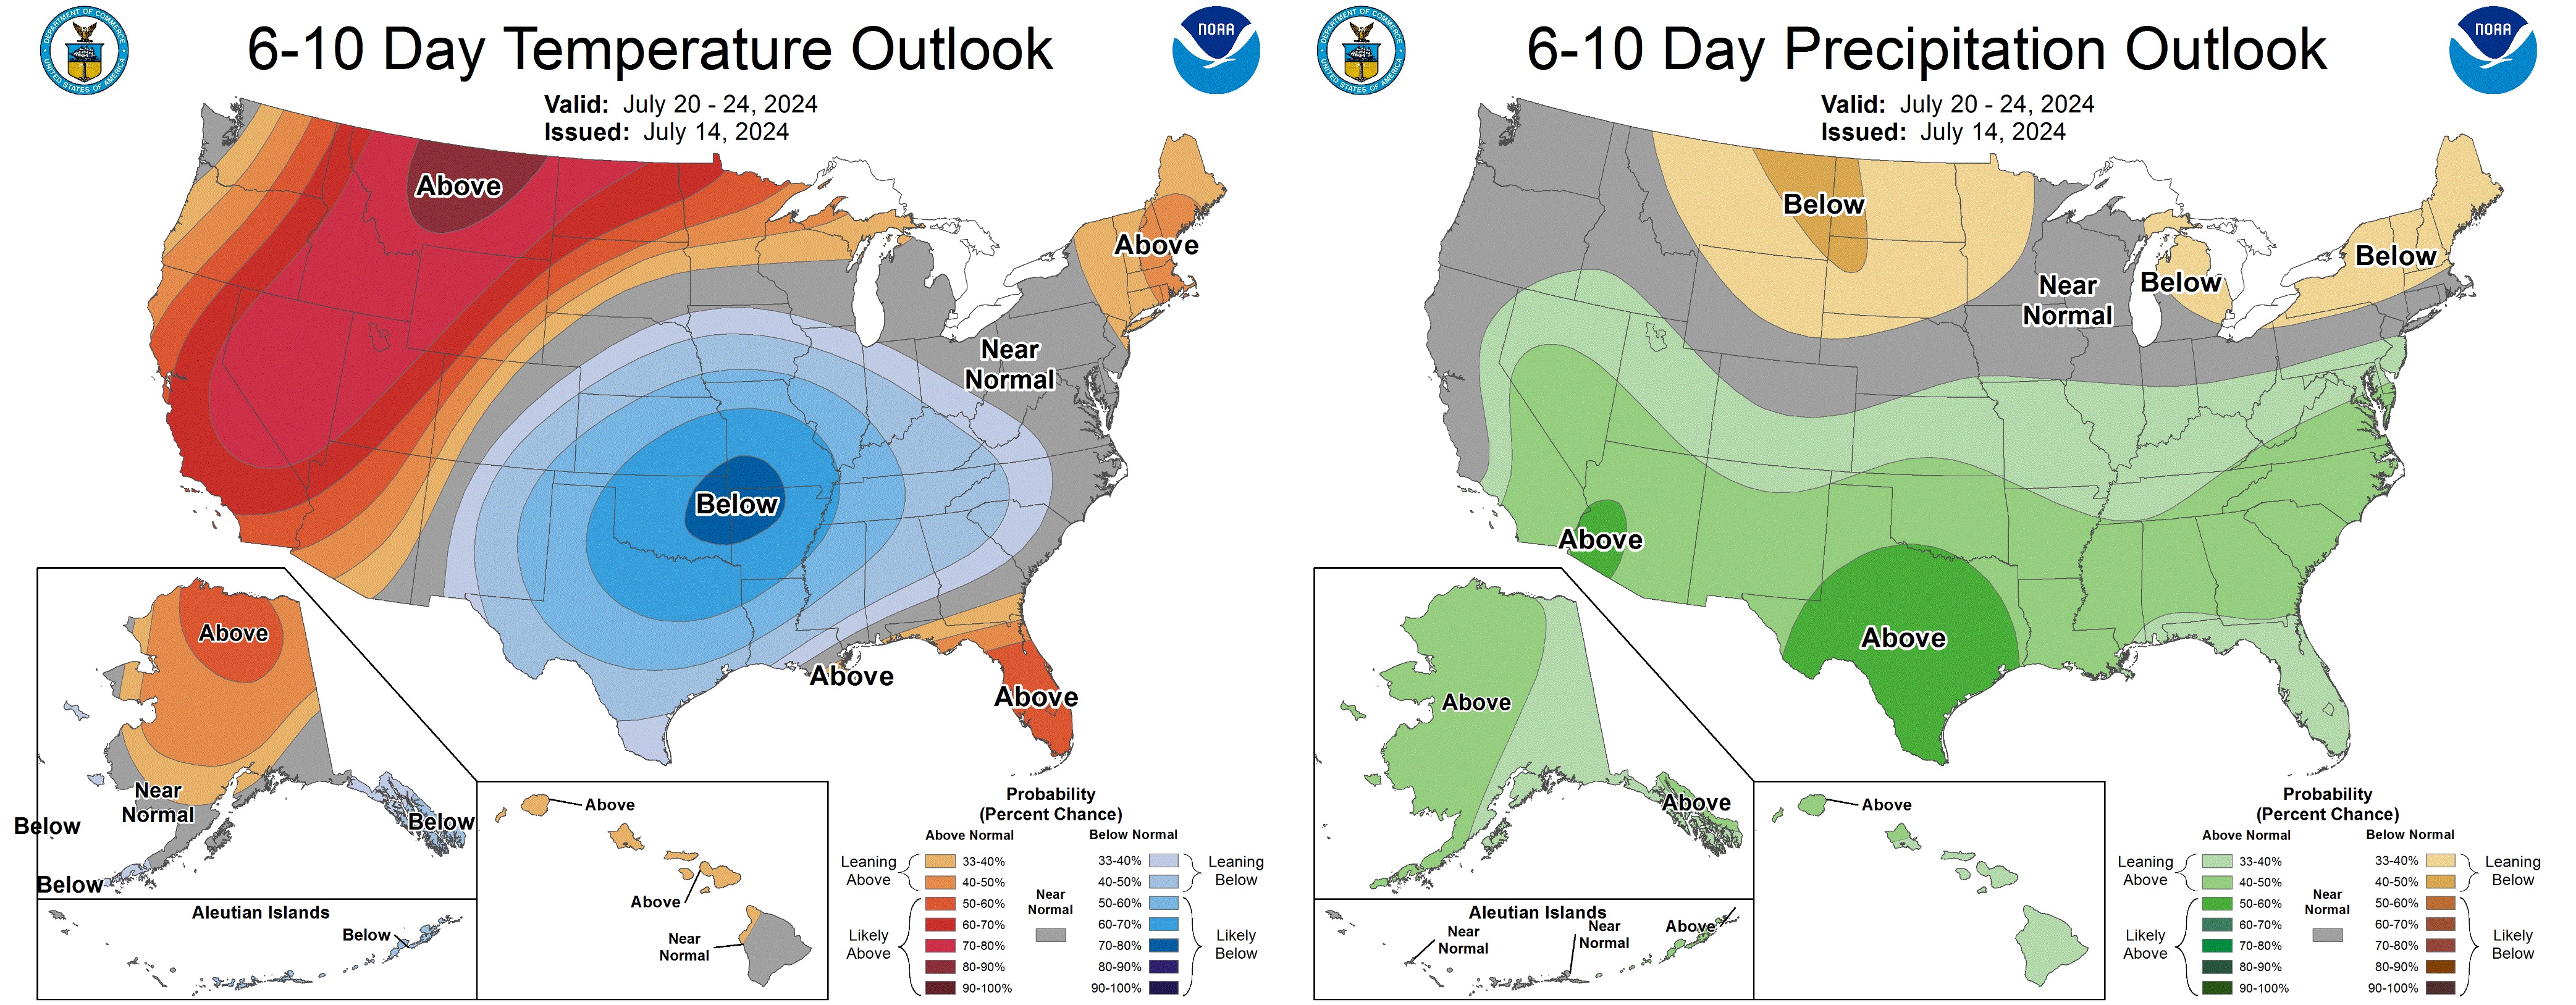 6-10 day temp and precip outlook maps 